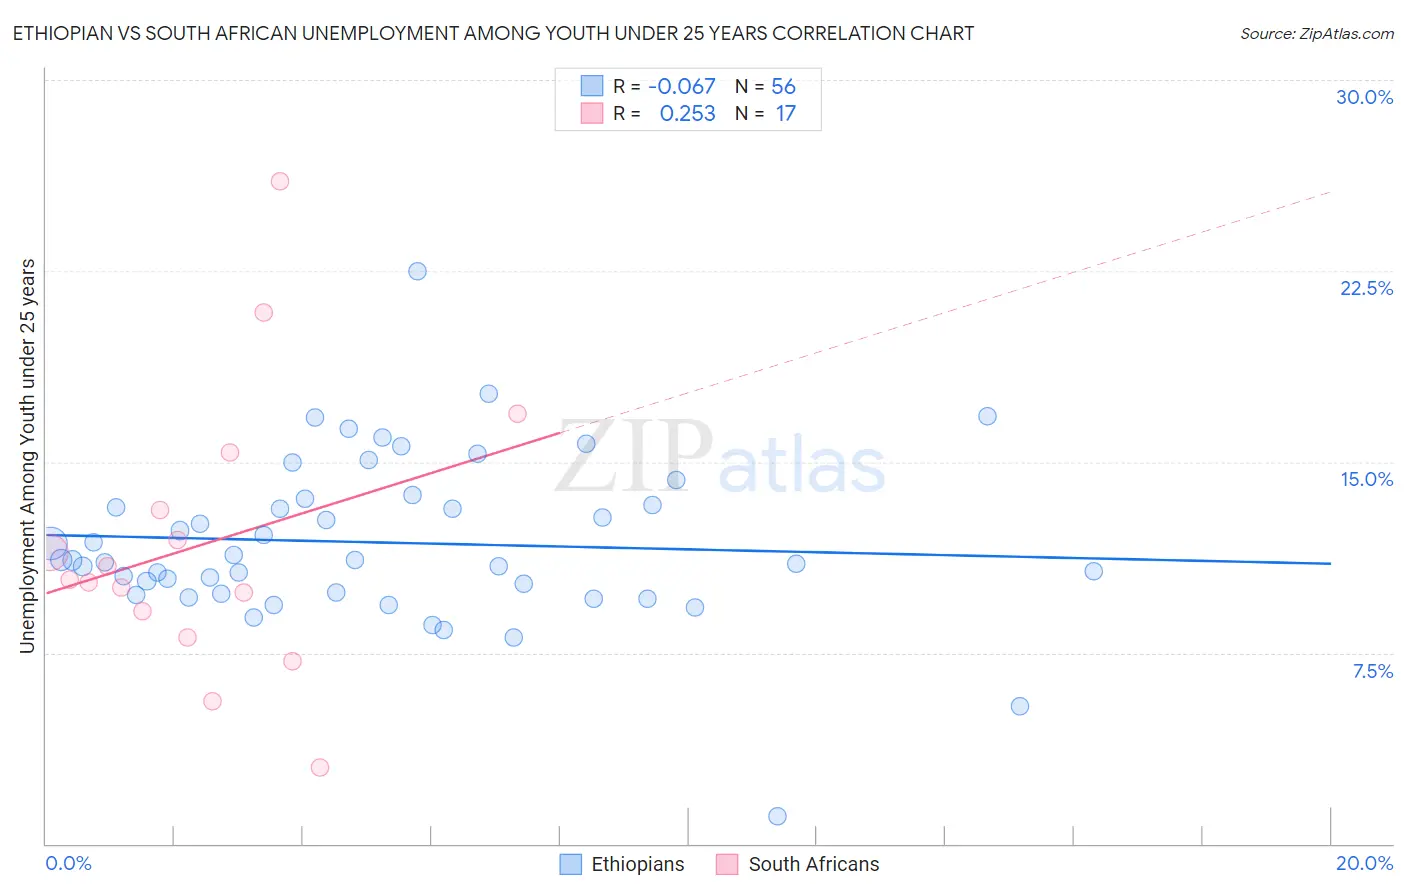 Ethiopian vs South African Unemployment Among Youth under 25 years